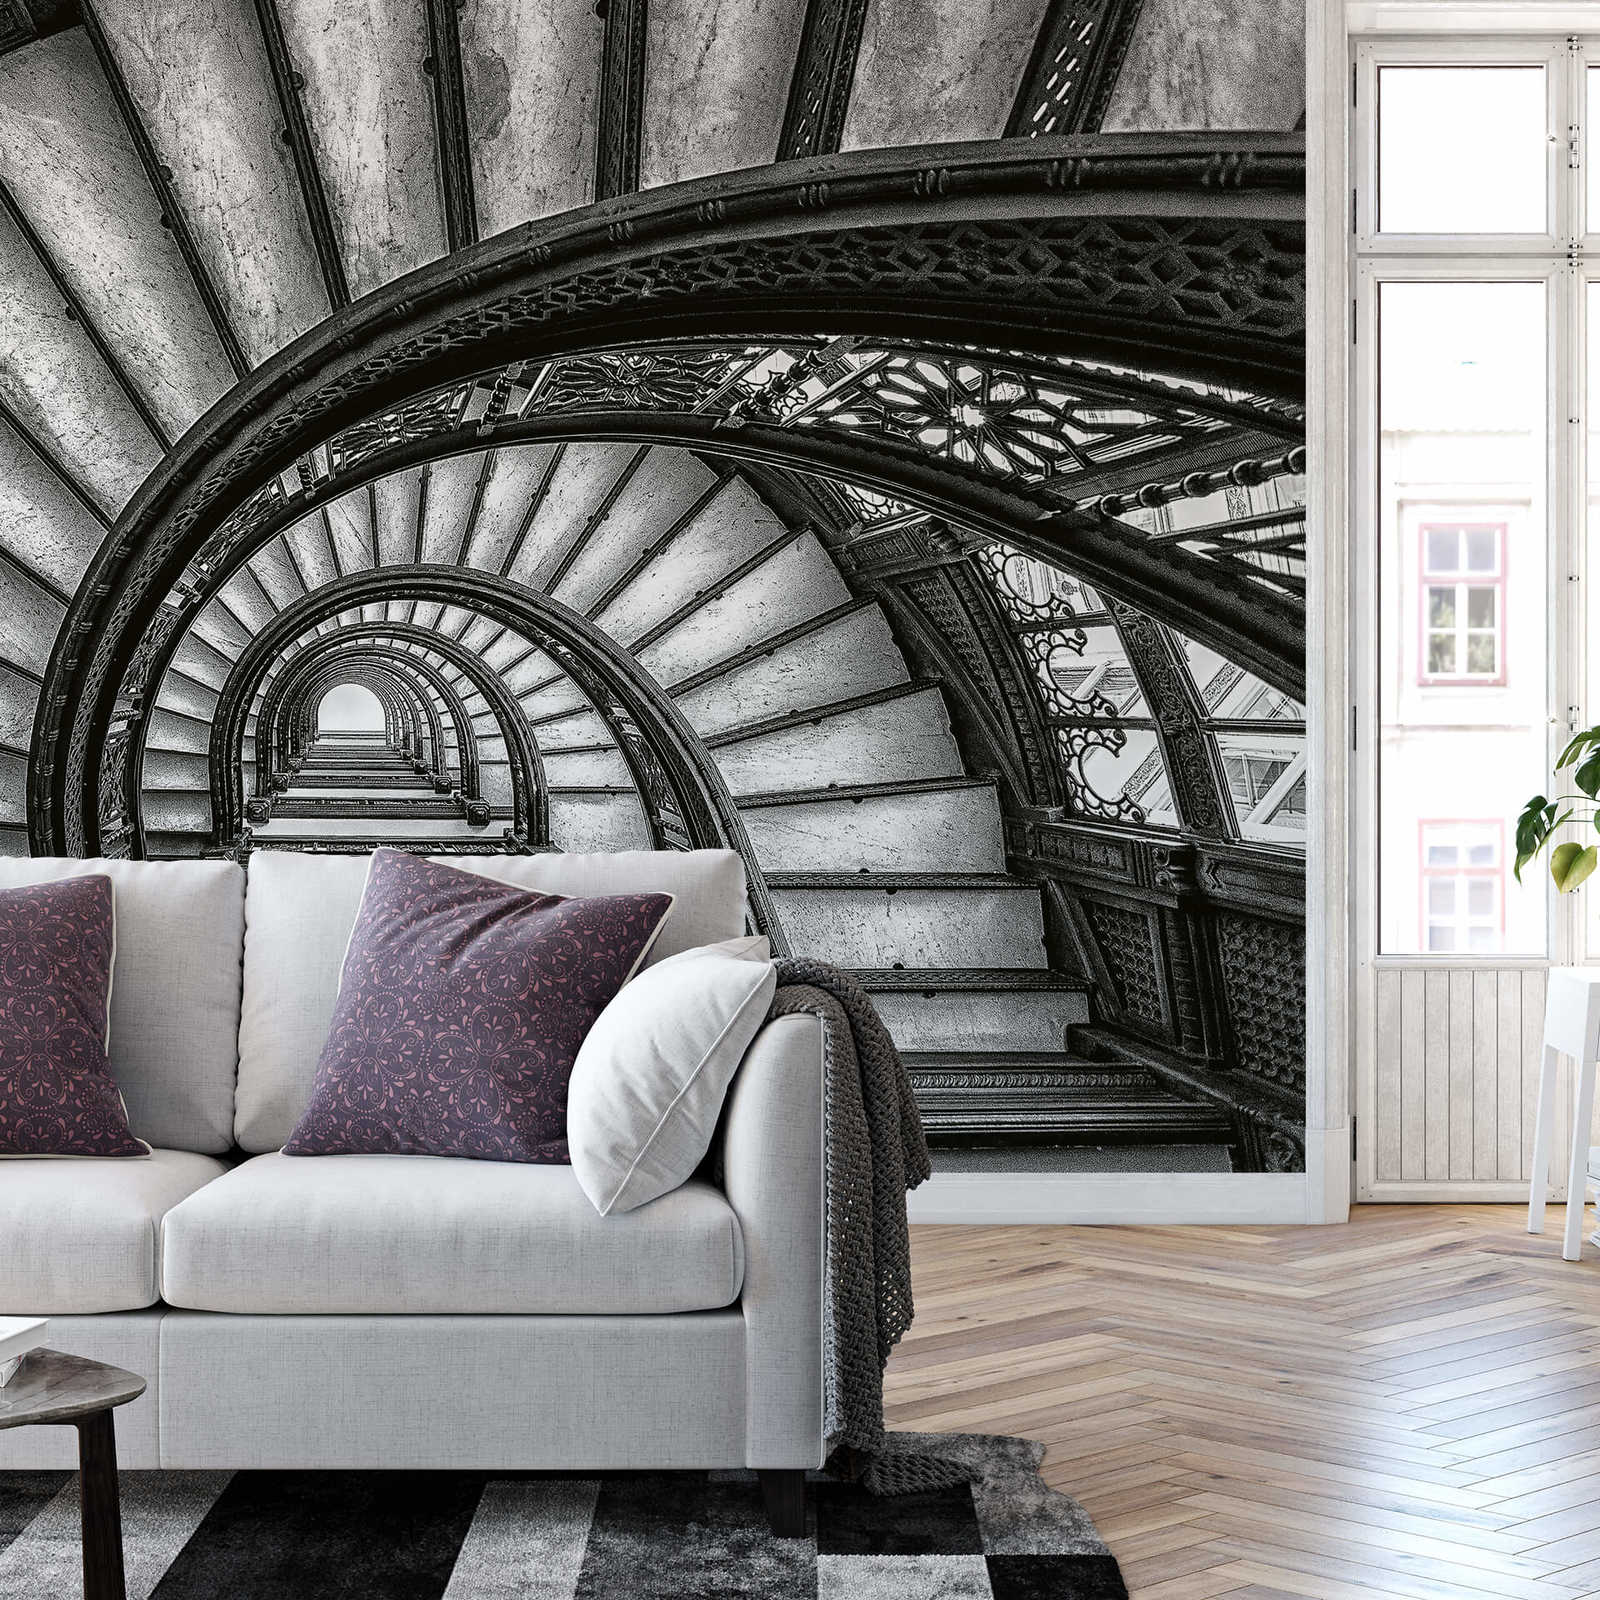             Photo wallpaper old stairs - grey, white, black
        